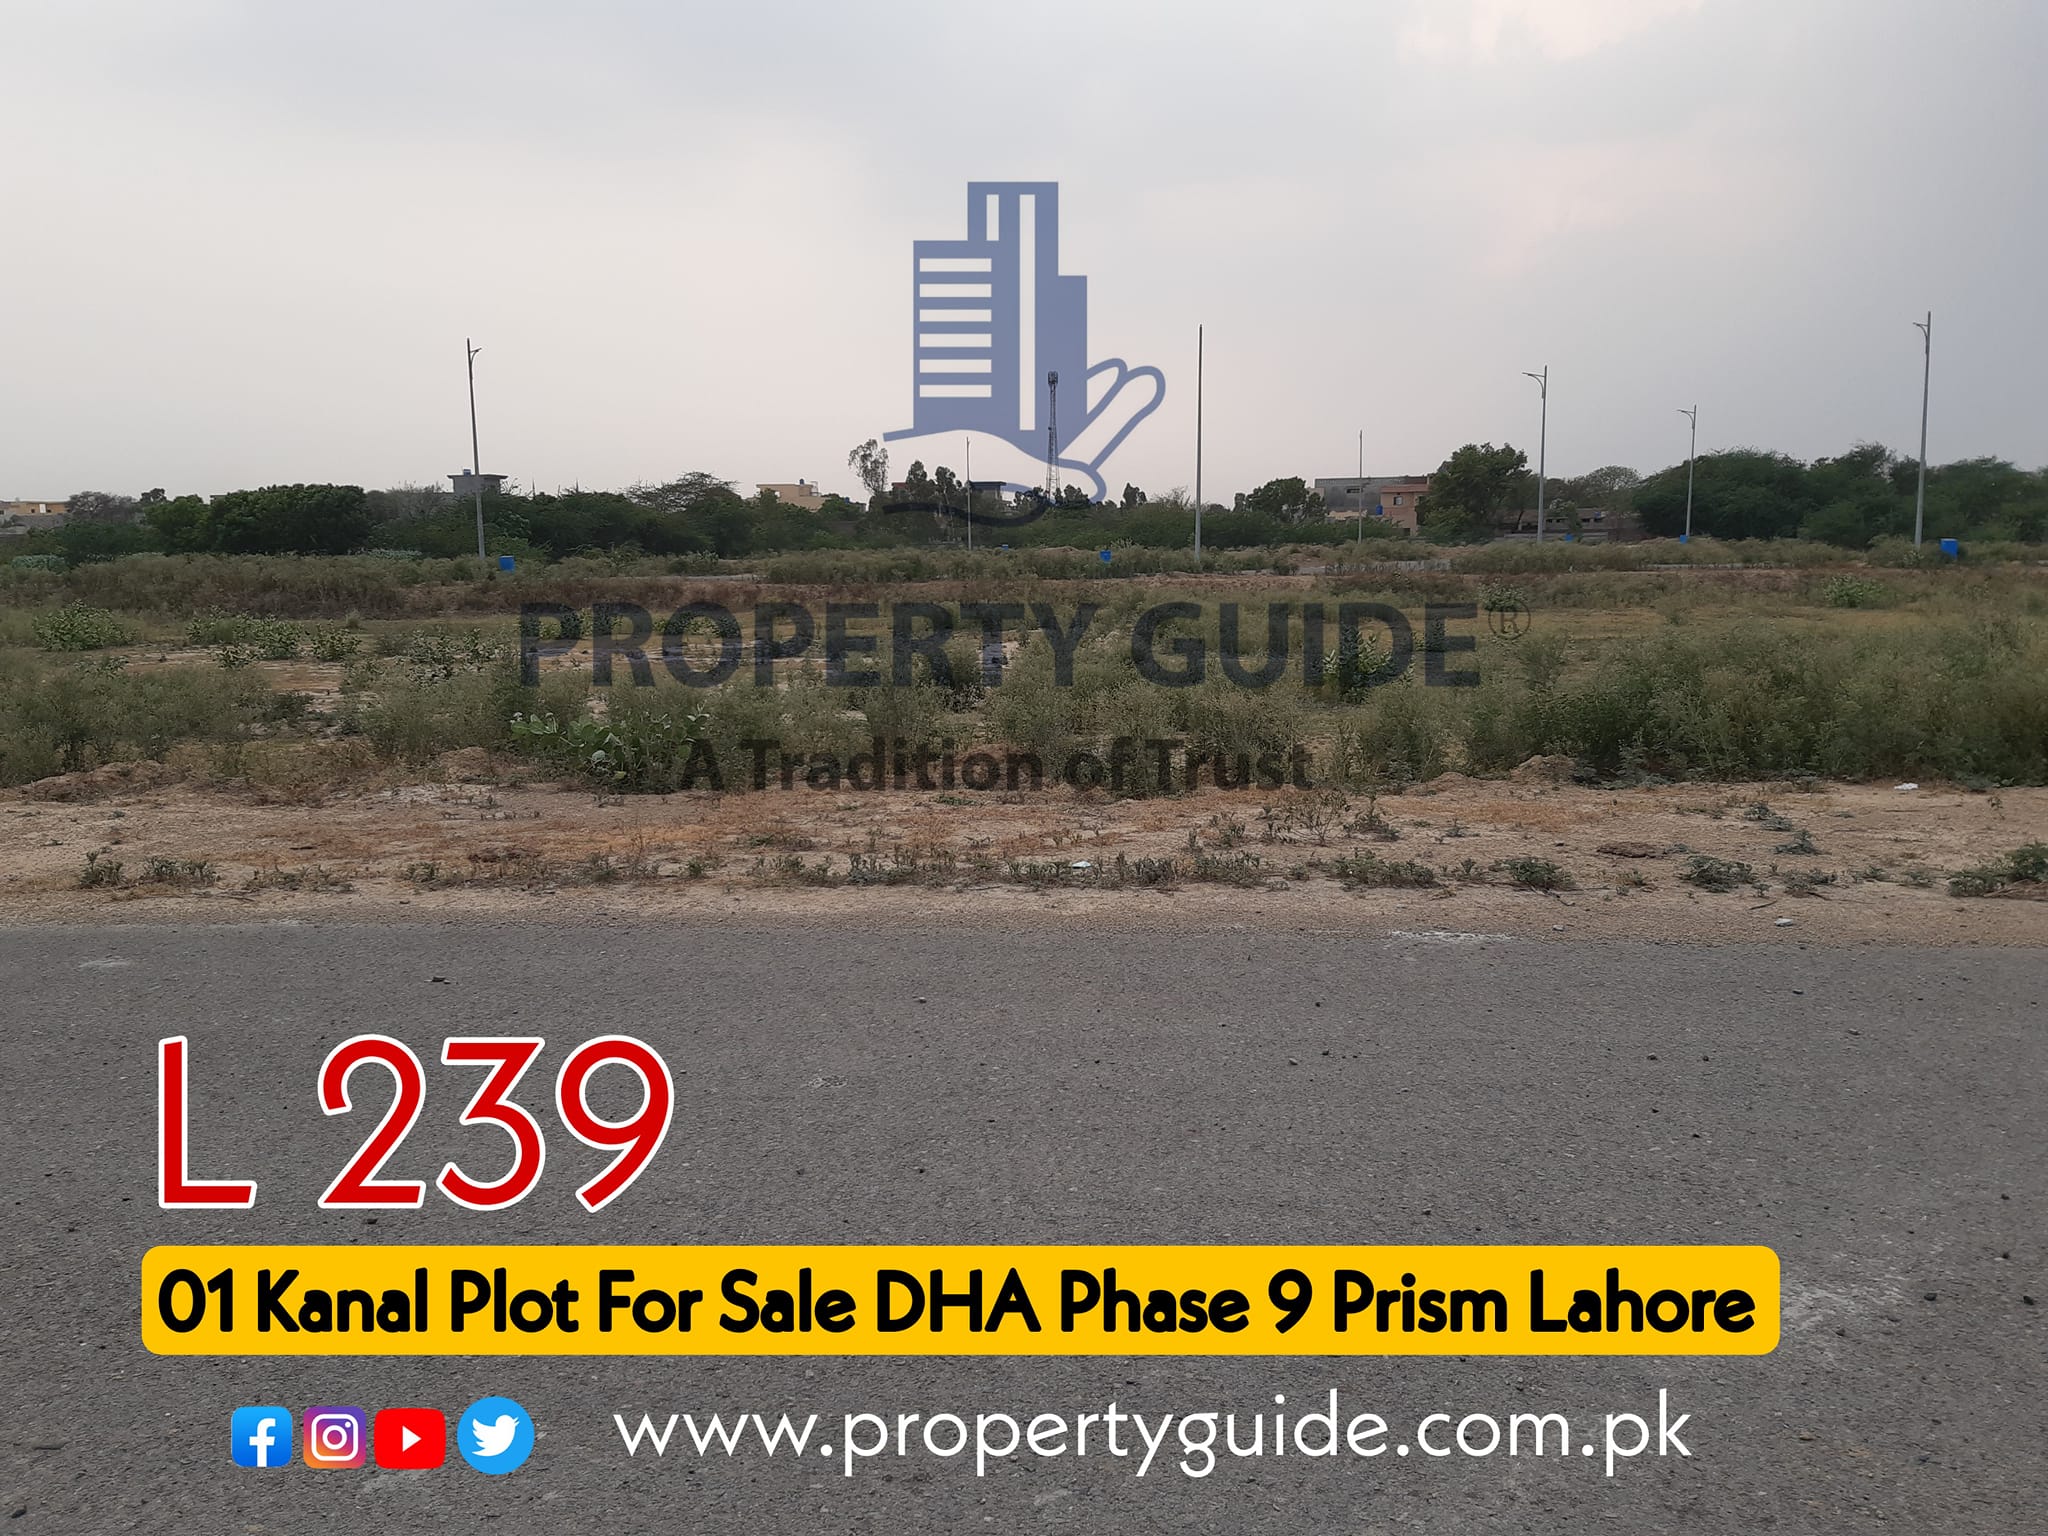 01 Kanal Plot For Sale In DHA Lahore Phase 9 Prism – L 239